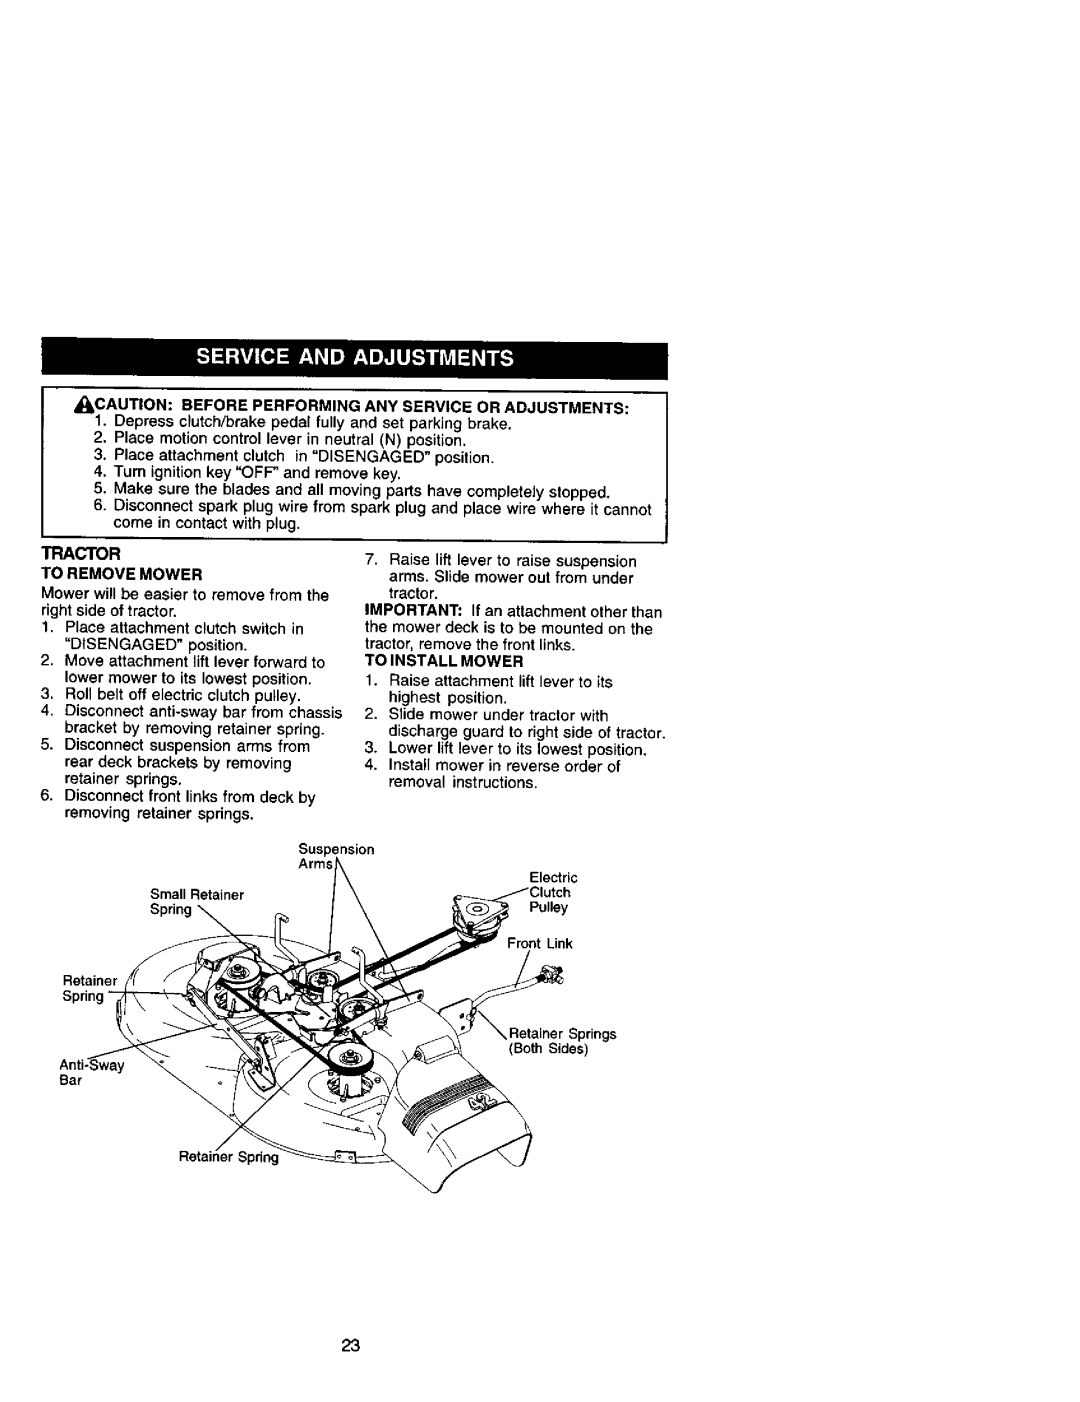 Craftsman 917.27242 owner manual Place motion control lever in neutral N position 